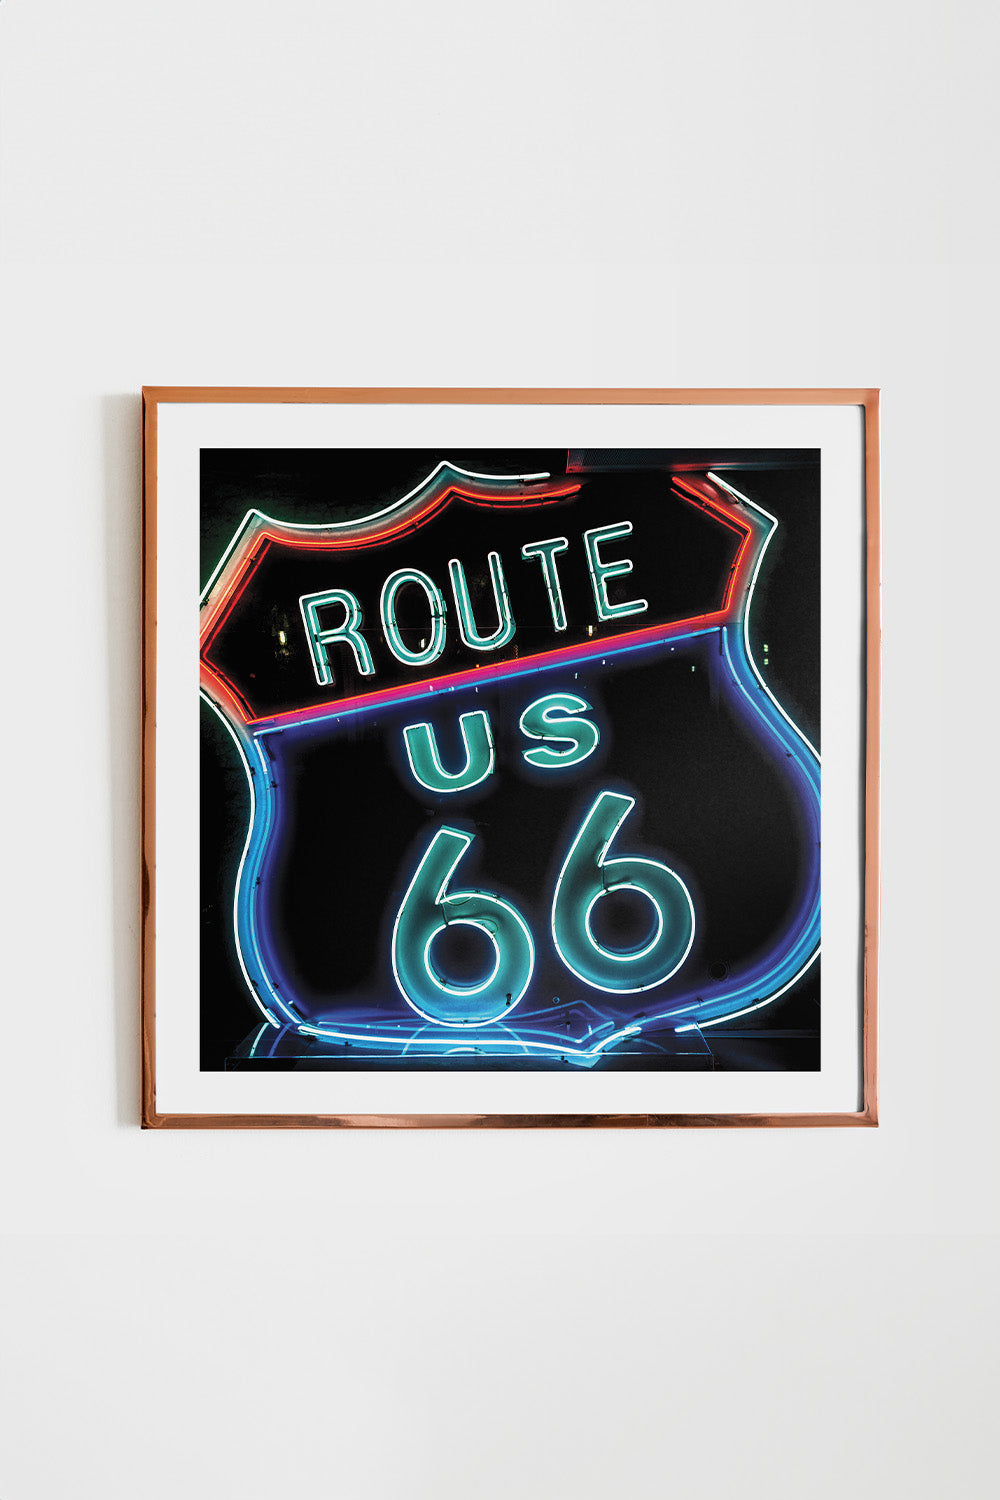 Square art print featuring a neon-style outline of the Route 66 sign against a bold black background.